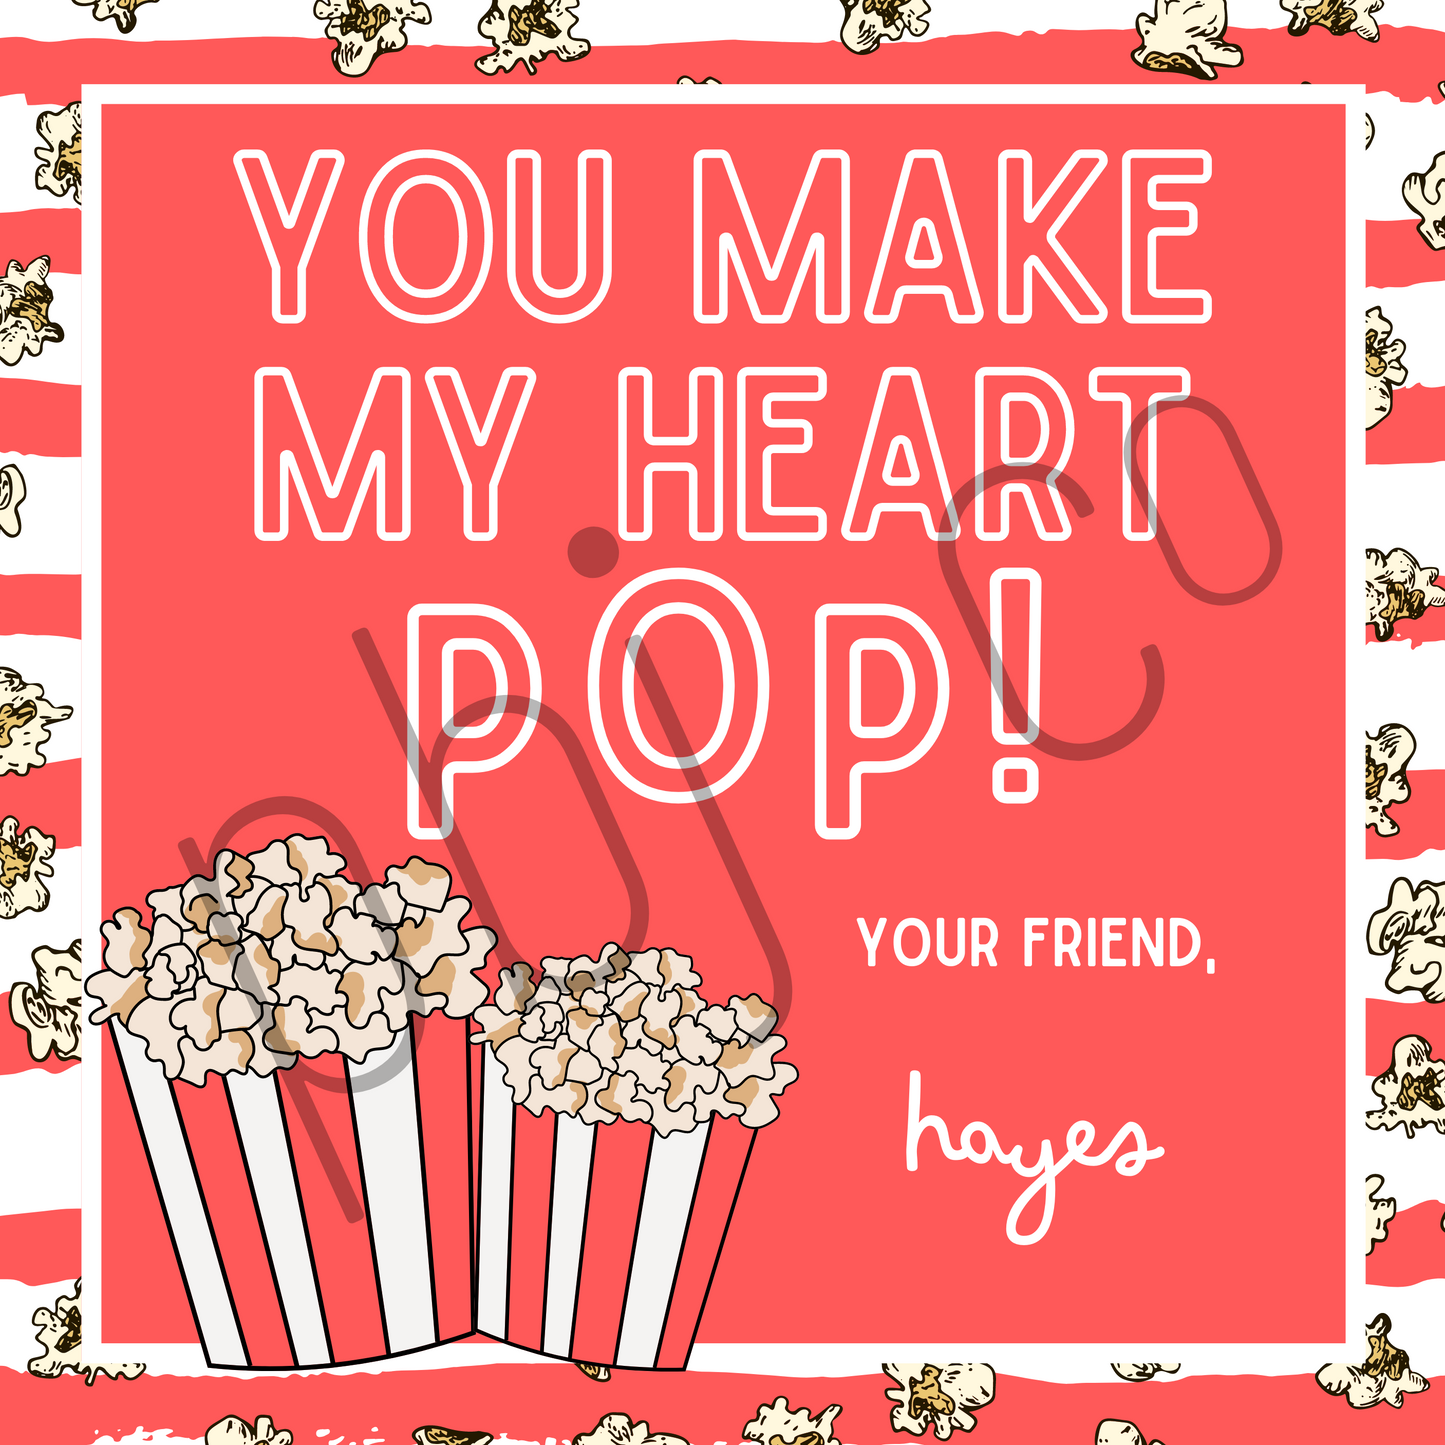 PRINTED Kids Customized Popcorn Valentine's Day Set of 24 Cards Favors Boy Girl Valentines Gift Tag With Envelopes Classroom Daycare Teacher